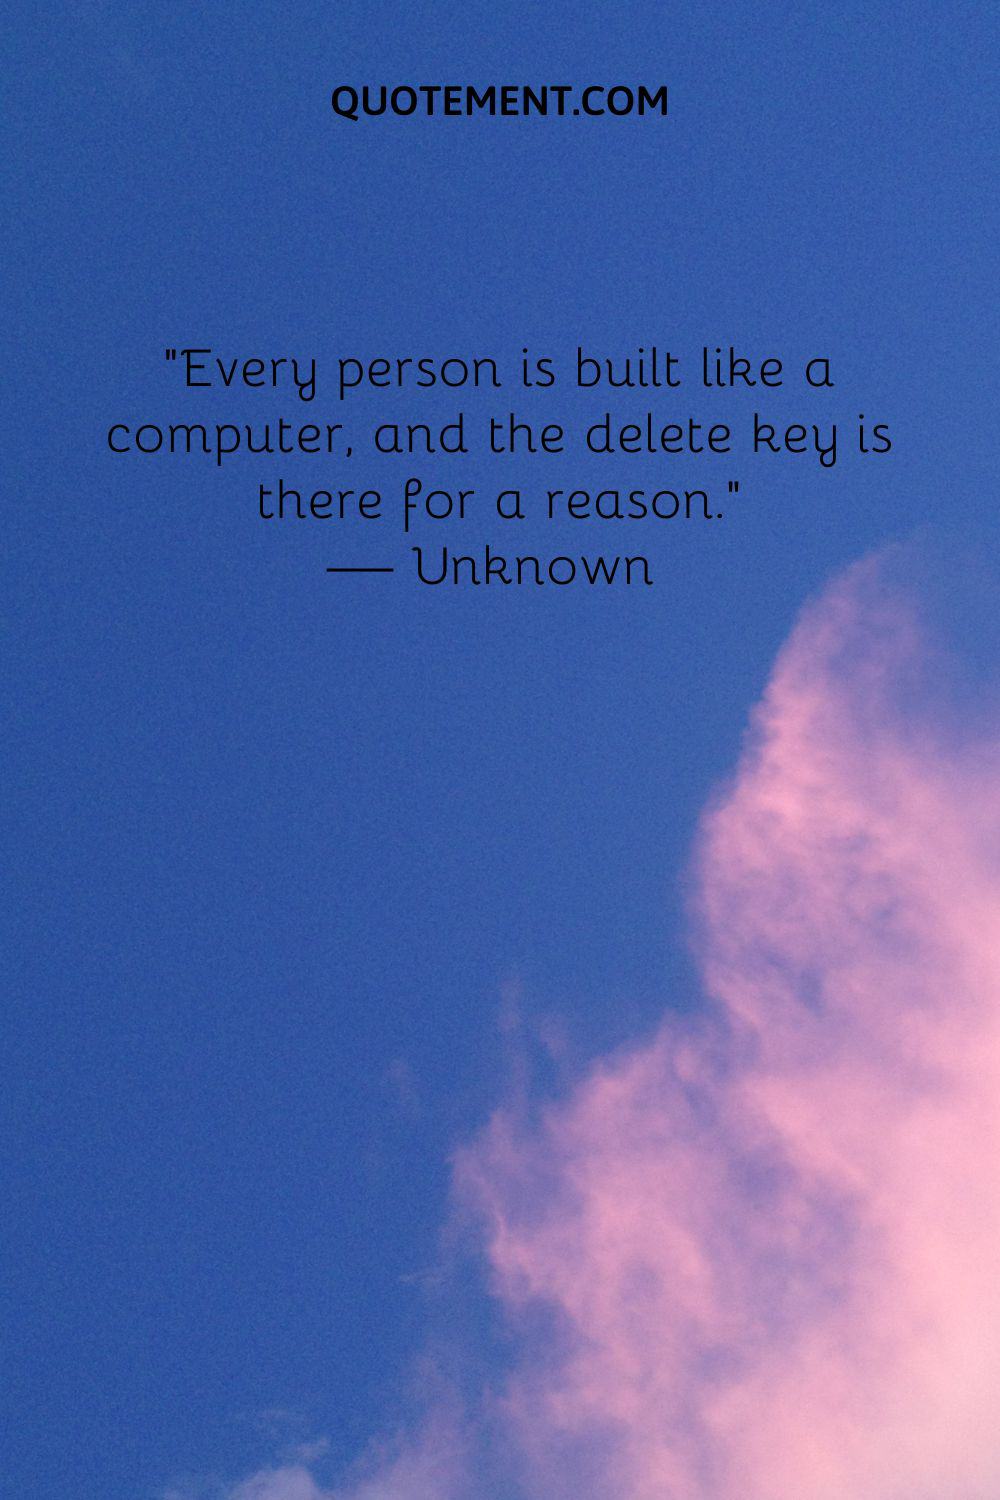 Every person is built like a computer, and the delete key is there for a reason